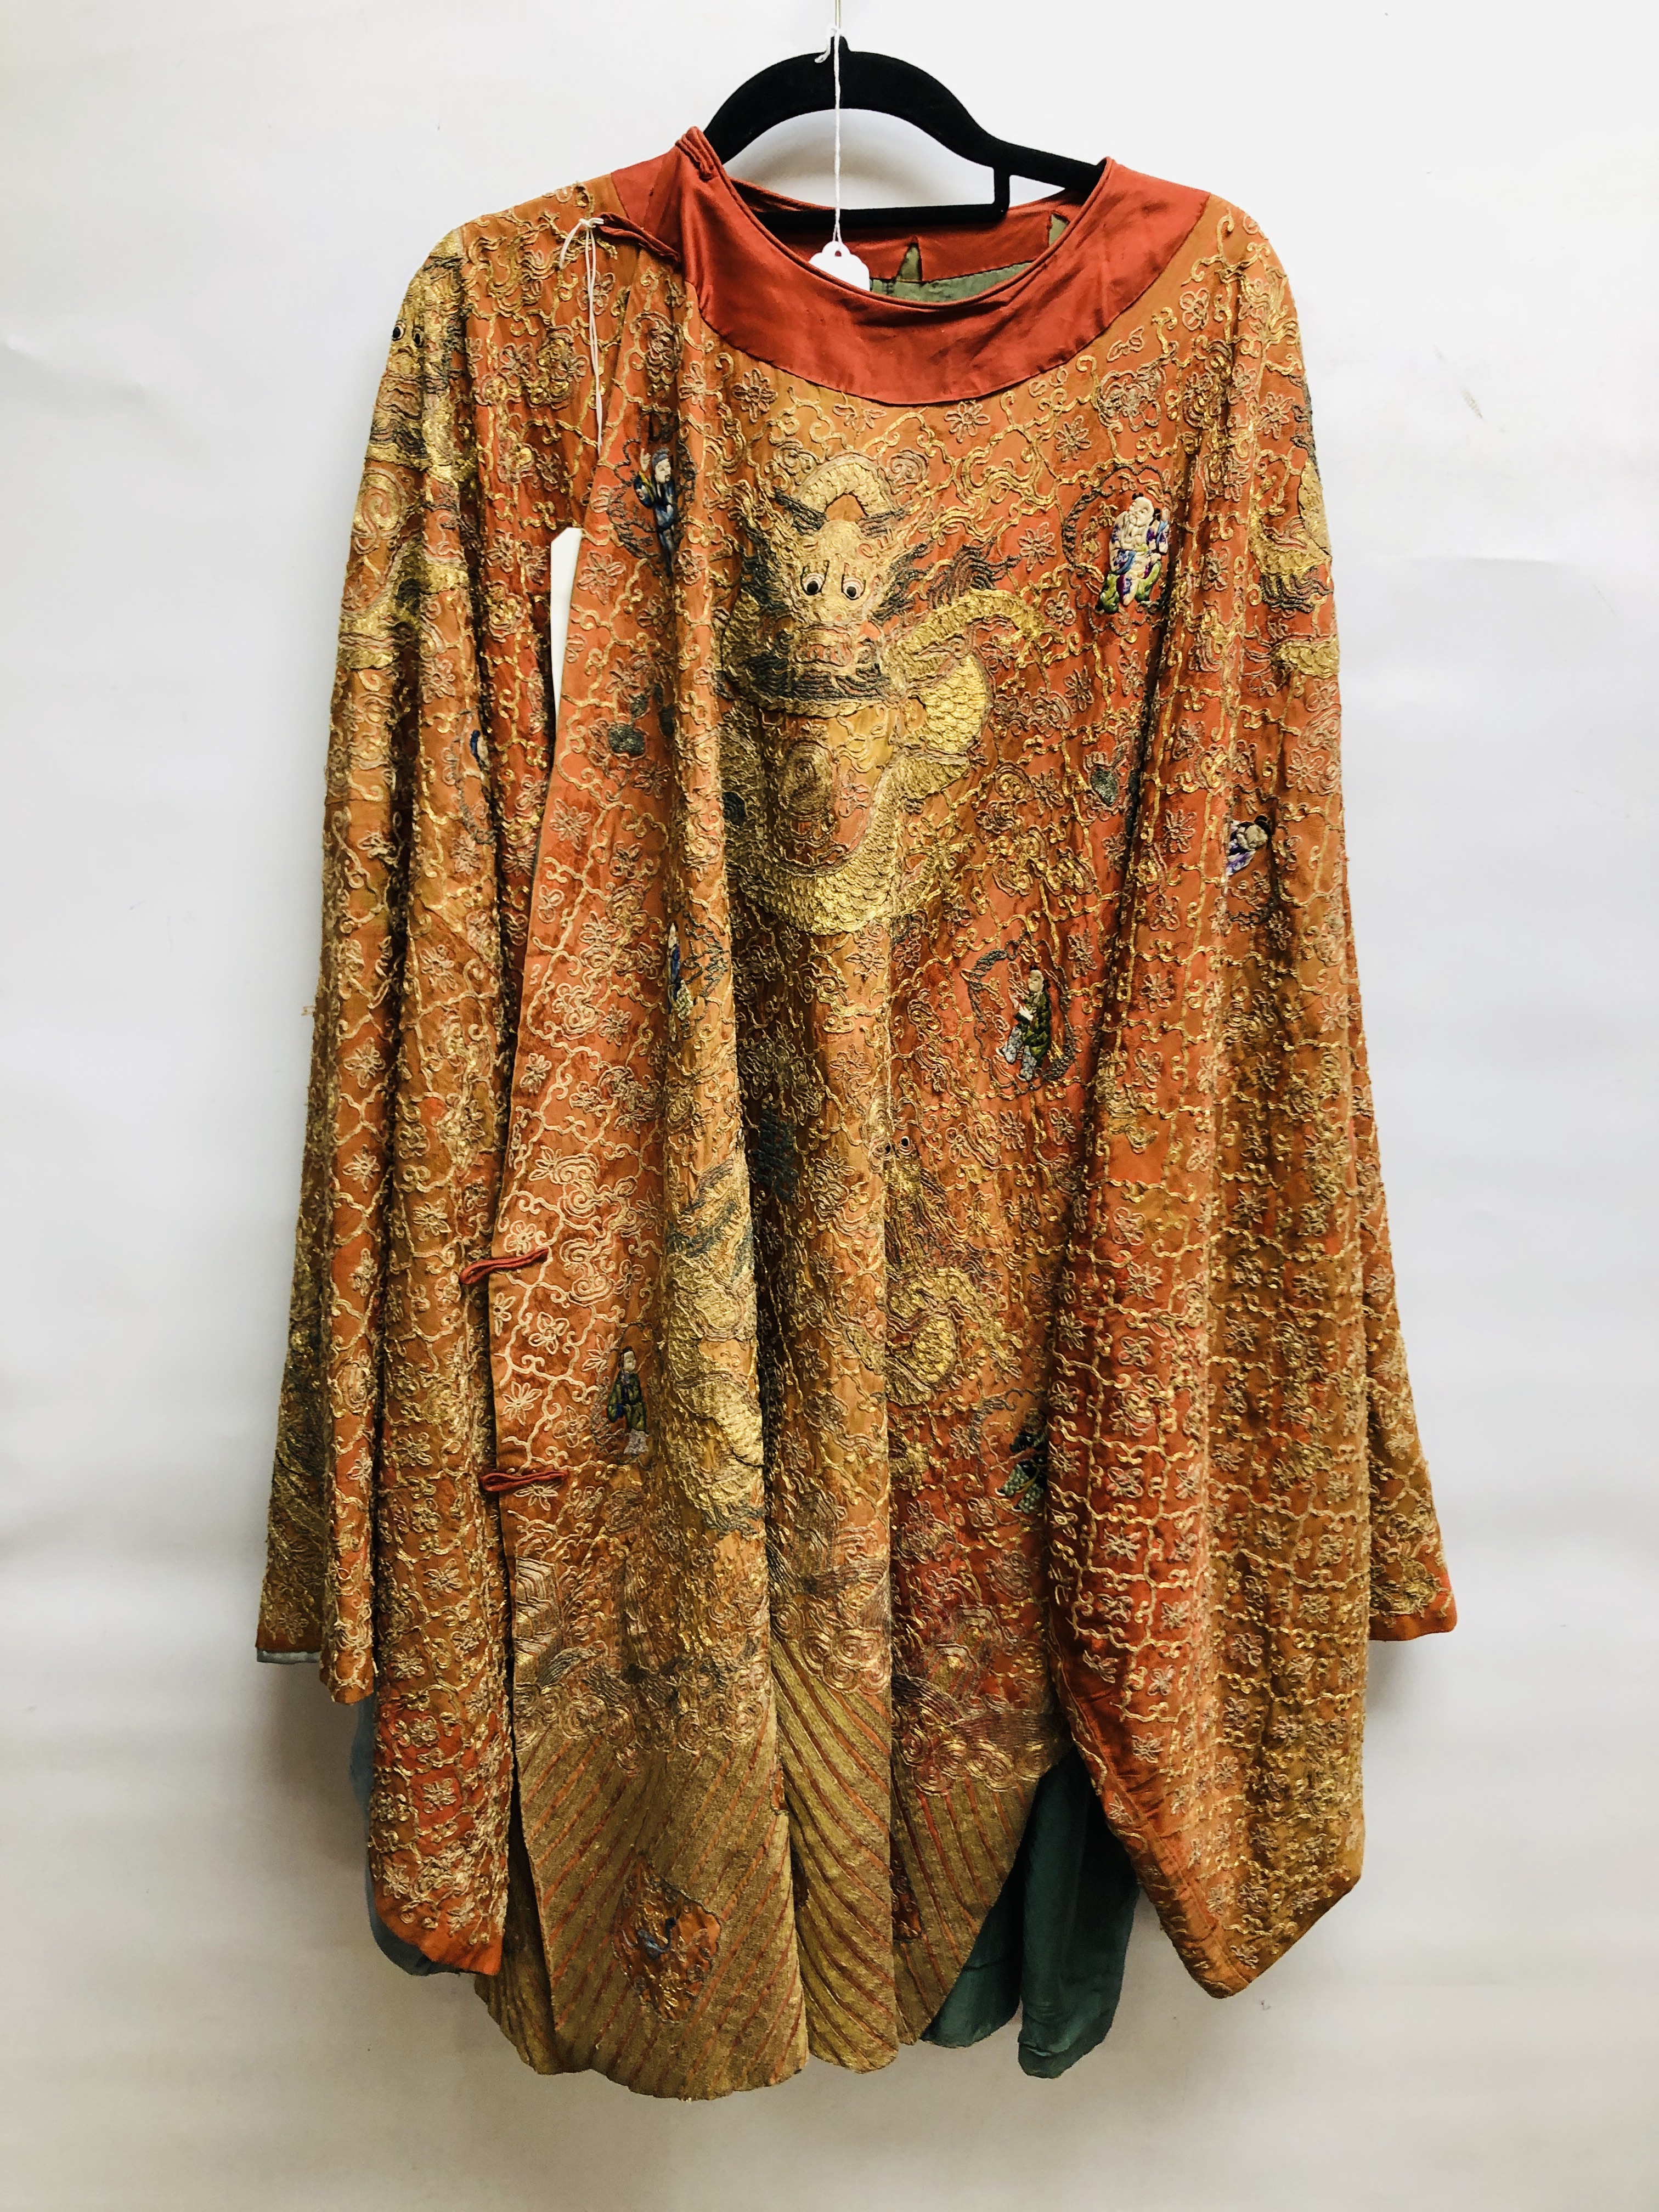 AN ELABORATE ANTIQUE CHINESE SILK CLOAK ON AN ORANGE FIELD EMBROIDERED WITH FIGURES AND GILT